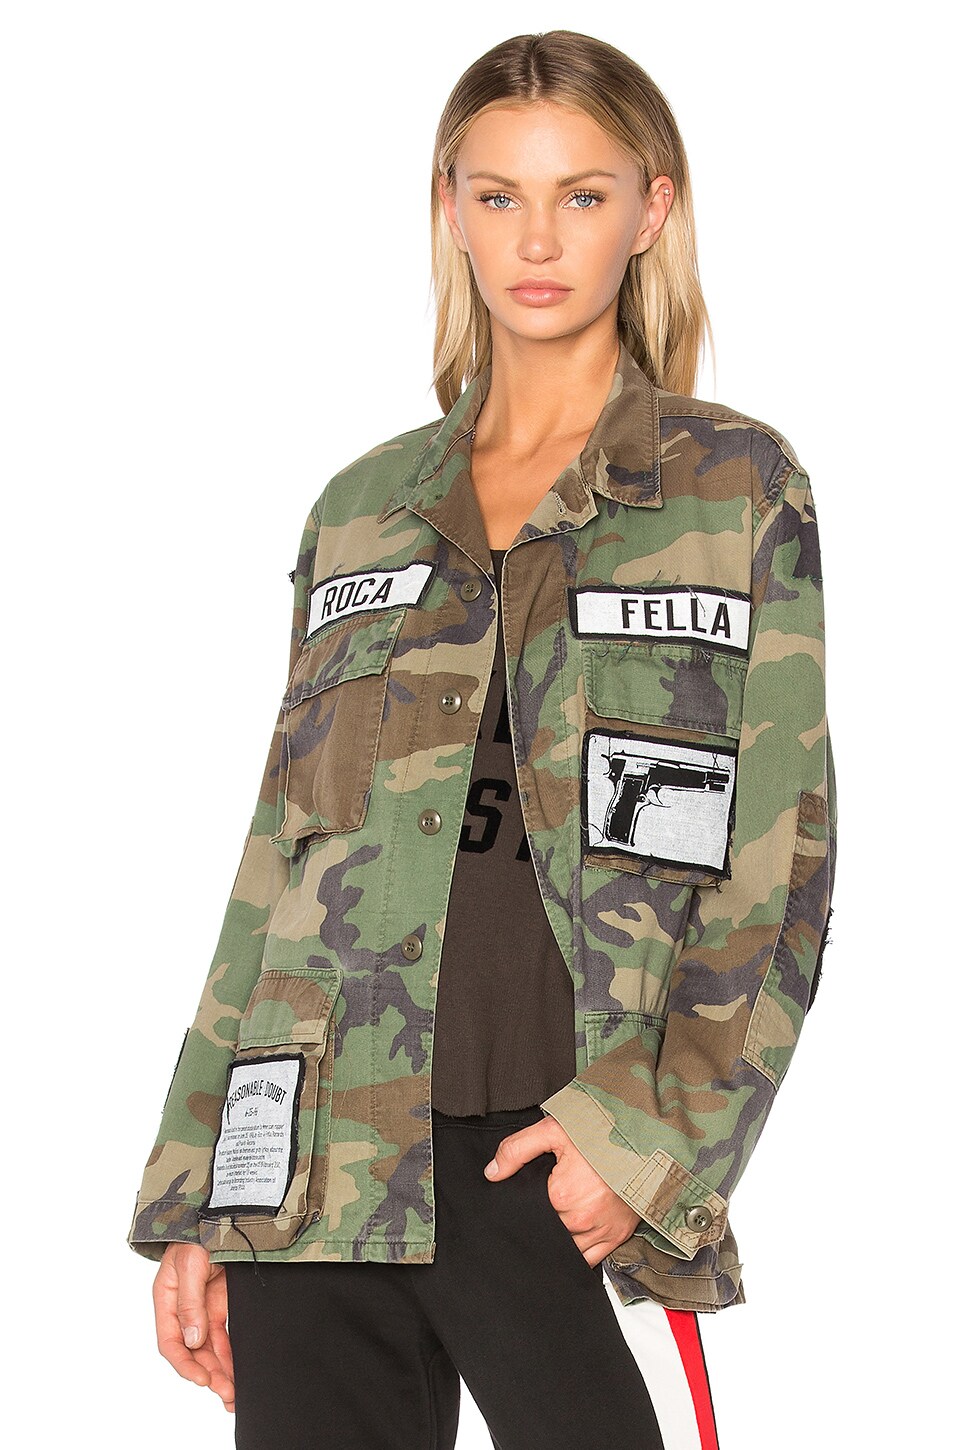 Charlotte McKinney rocks a military-inspired jacket | Daily Mail Online